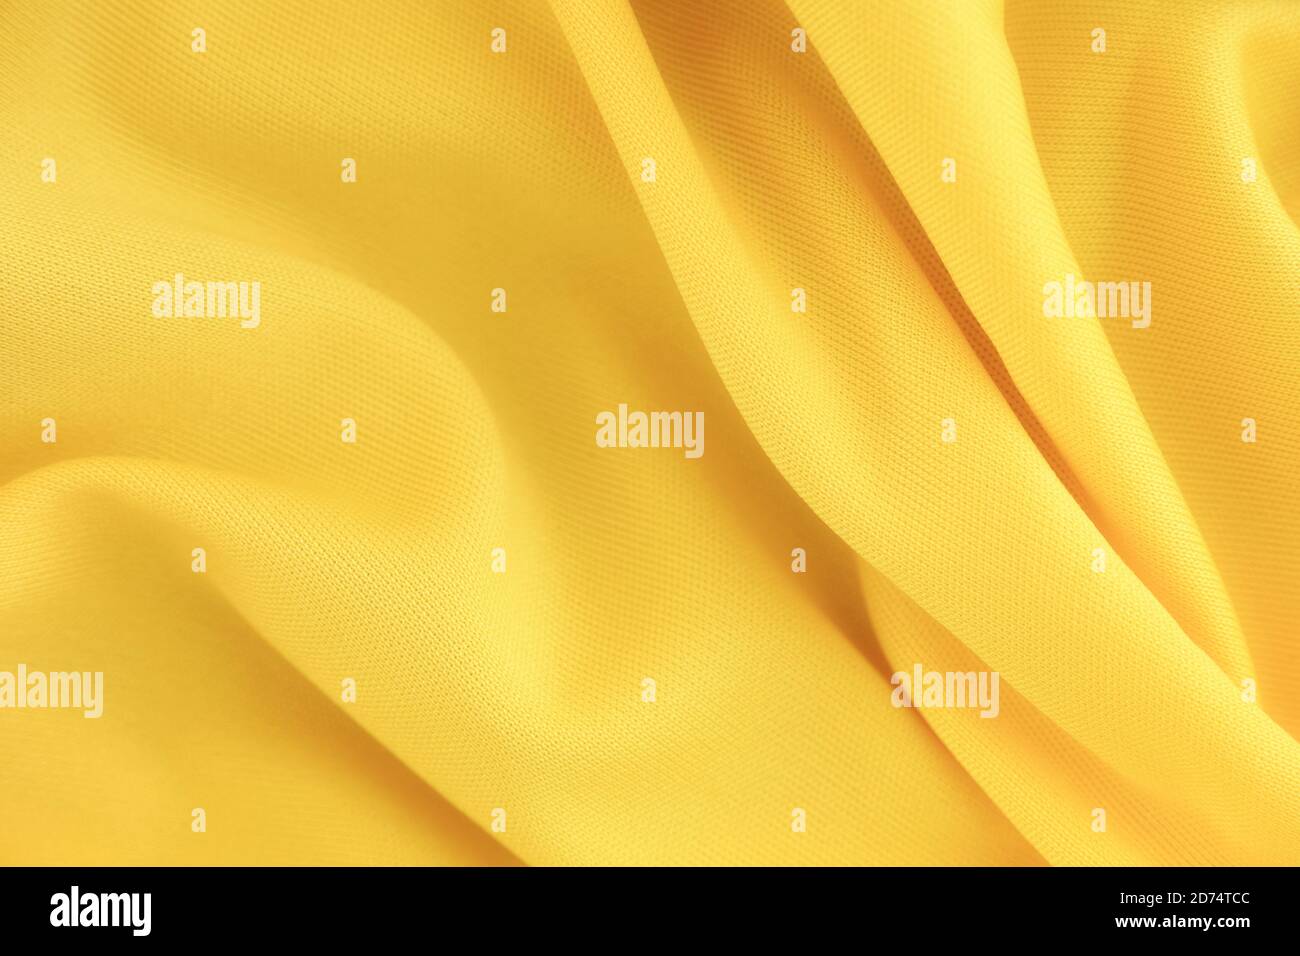 Folded white cloth texture stock image. Image of cotton - 187215889